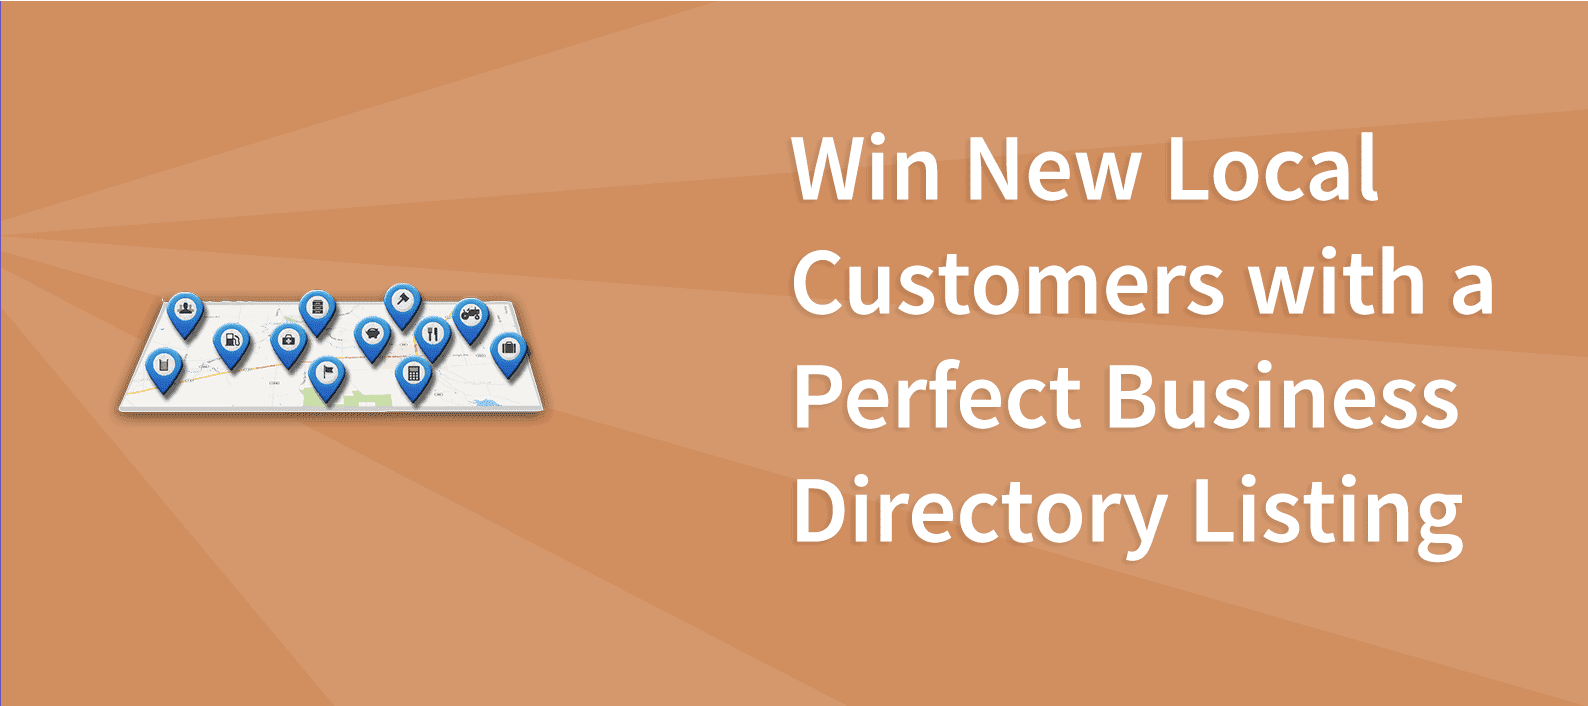 Win New Local Customers with a Perfect Business Directory Listing